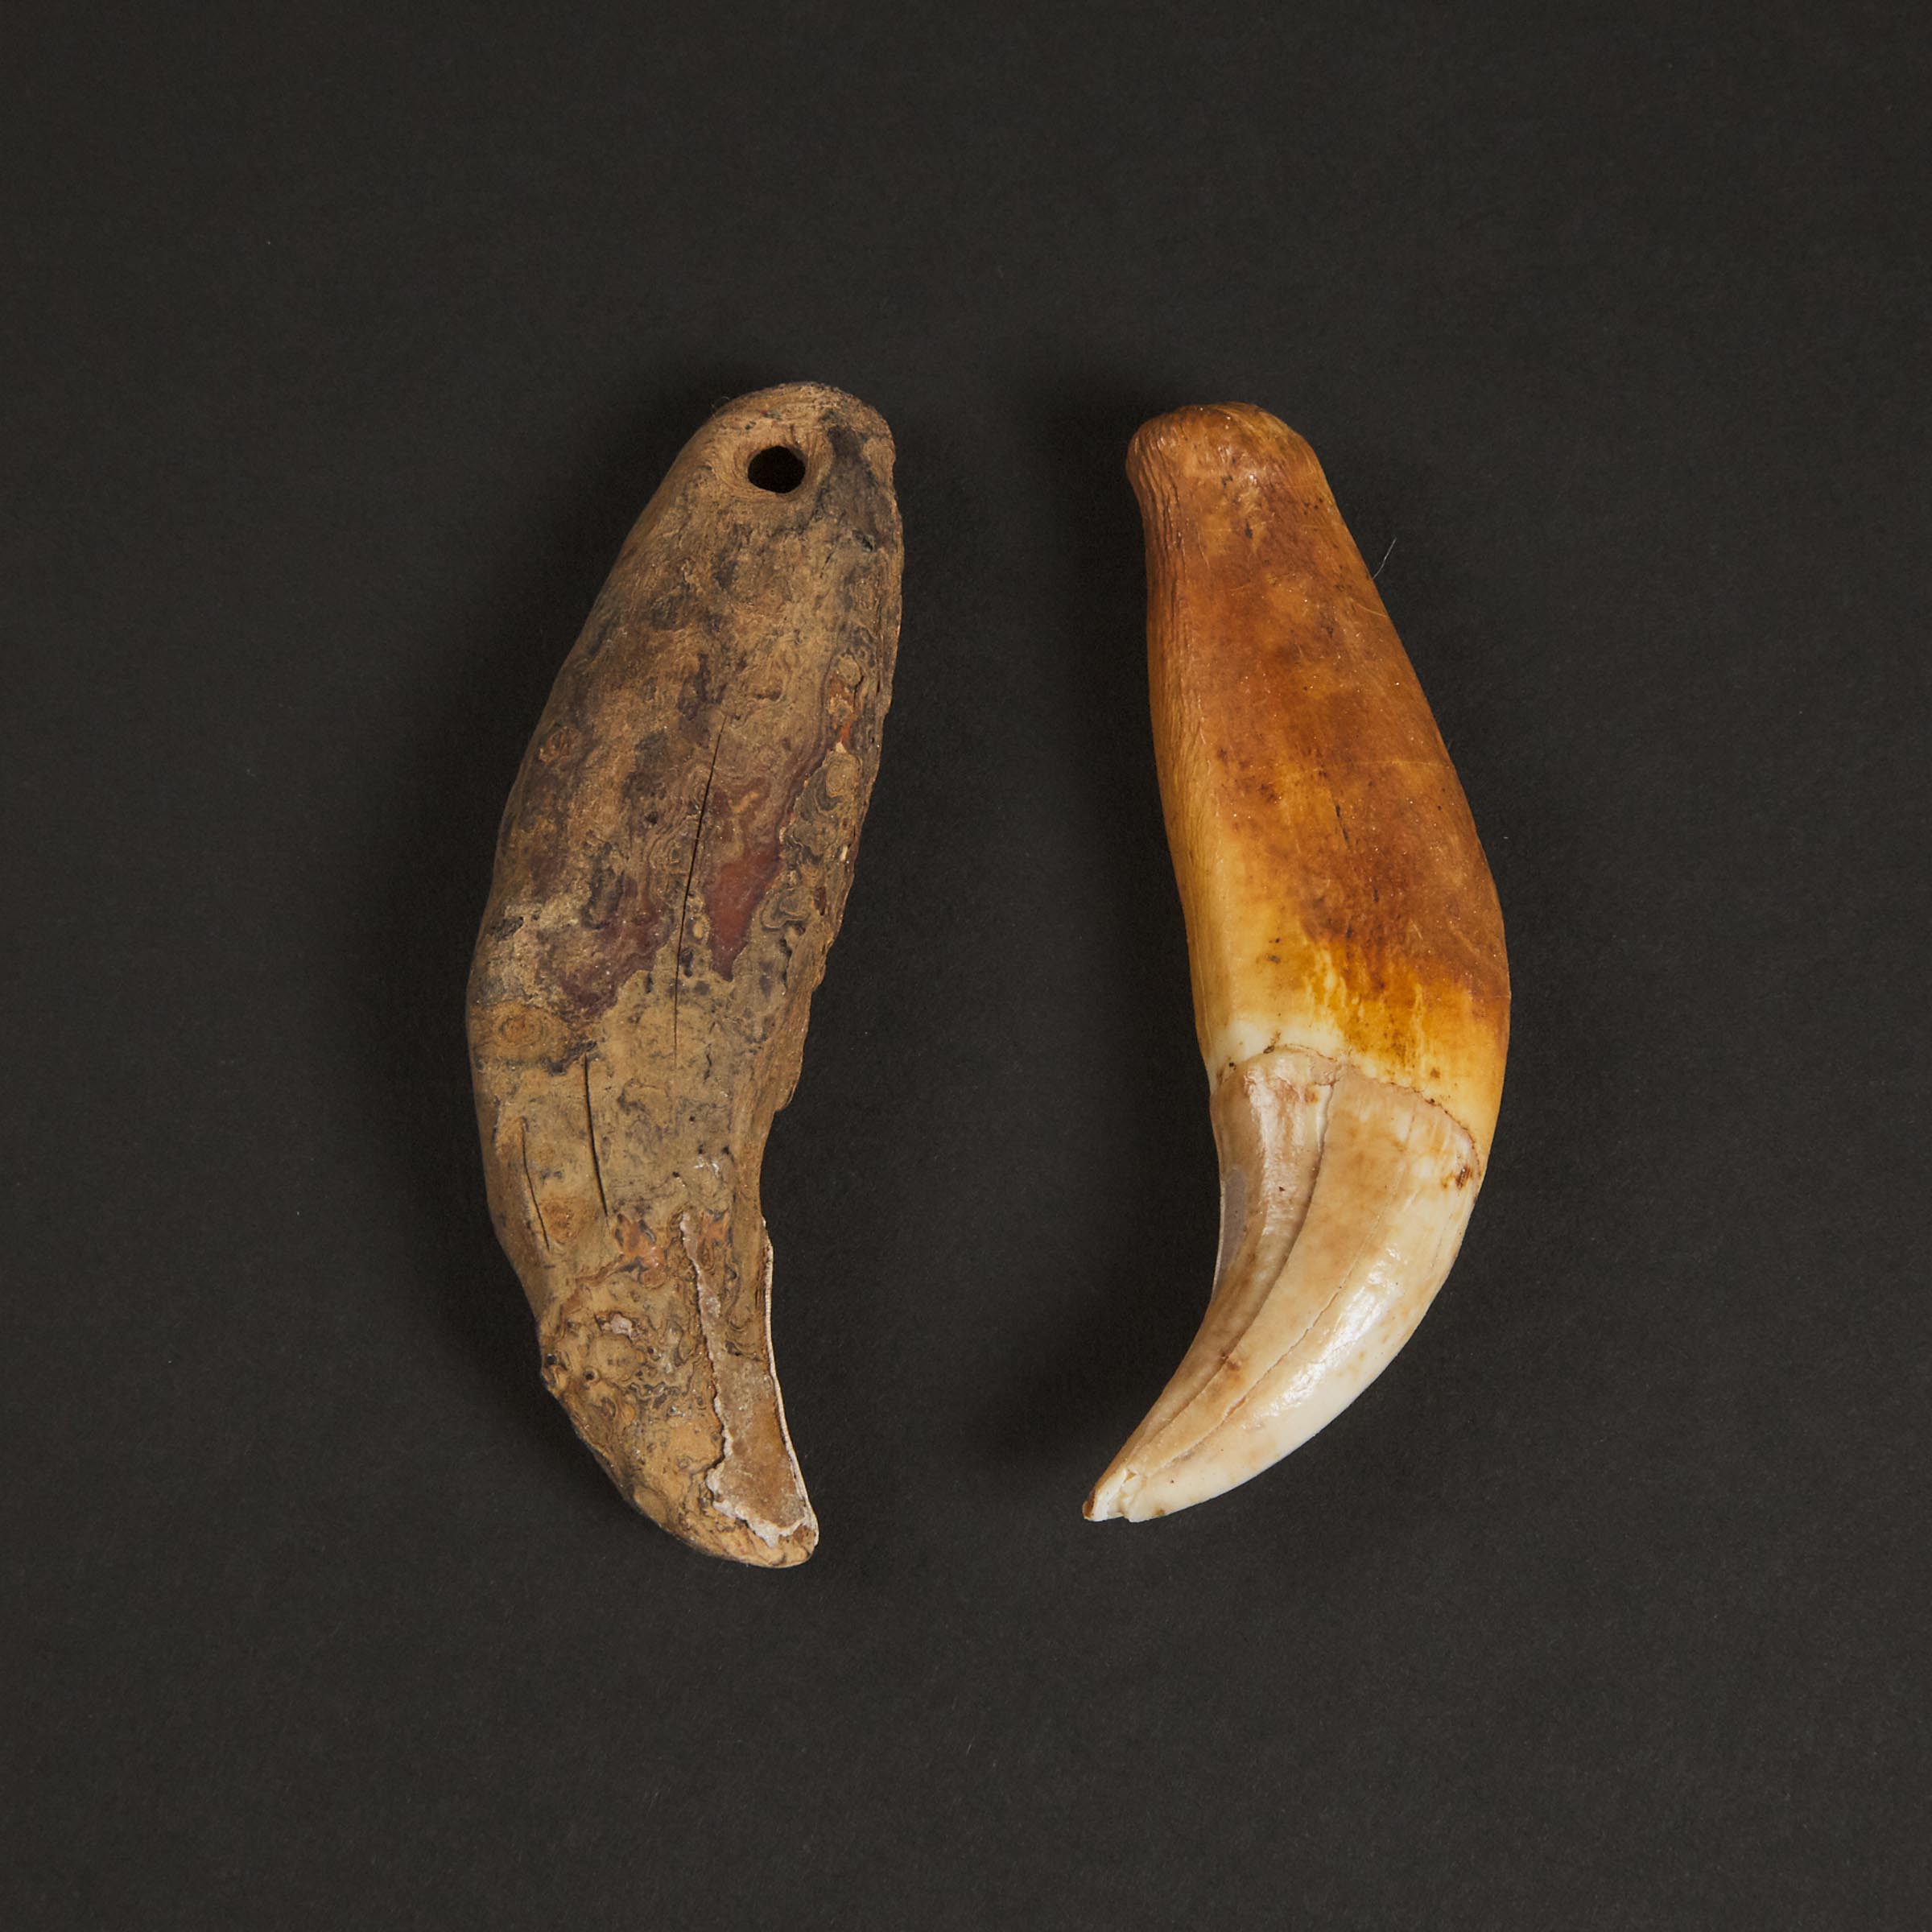 Two Polar Bear Tooth Amulets, Old Bering Sea,  Savoonga, Sivuqaq (St. Lawrence Island), Pre-1800